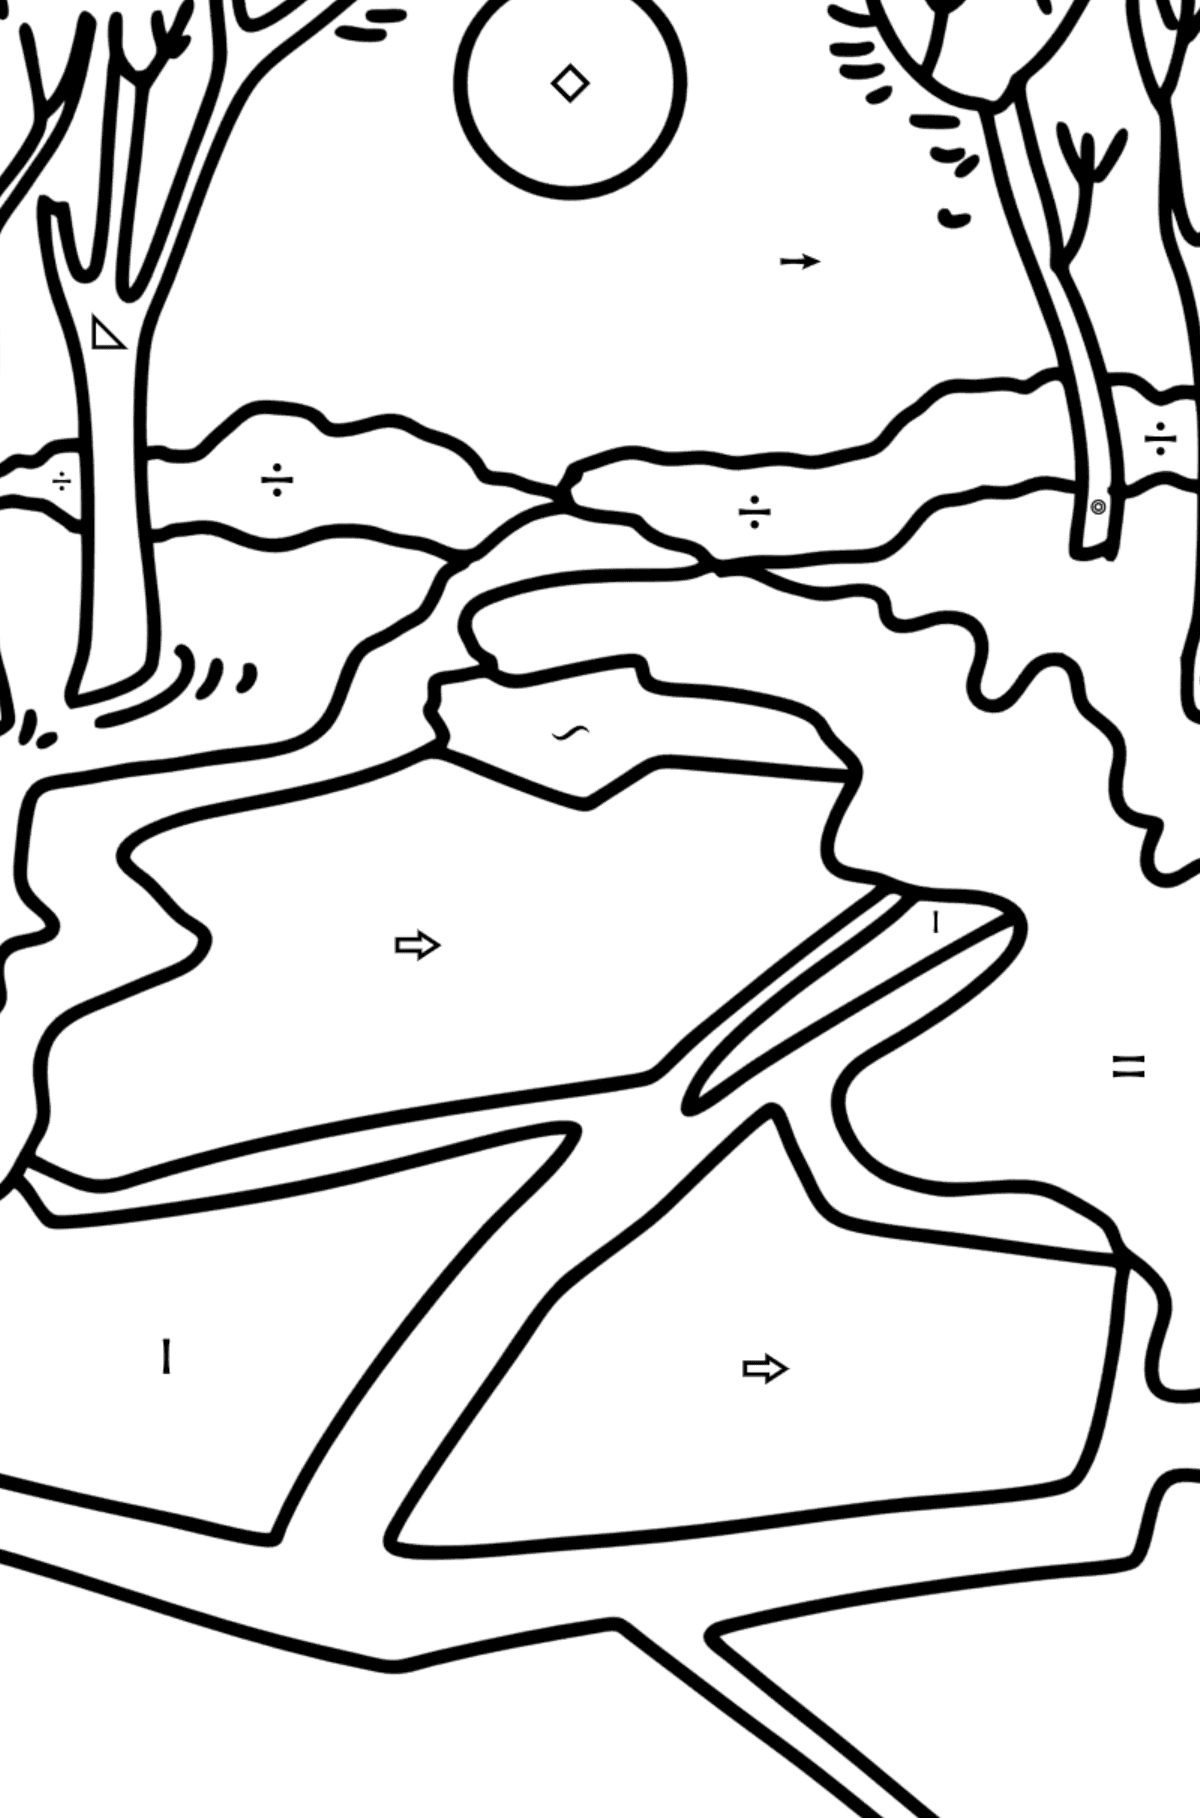 Spring River coloring page - Coloring by Symbols and Geometric Shapes for Kids